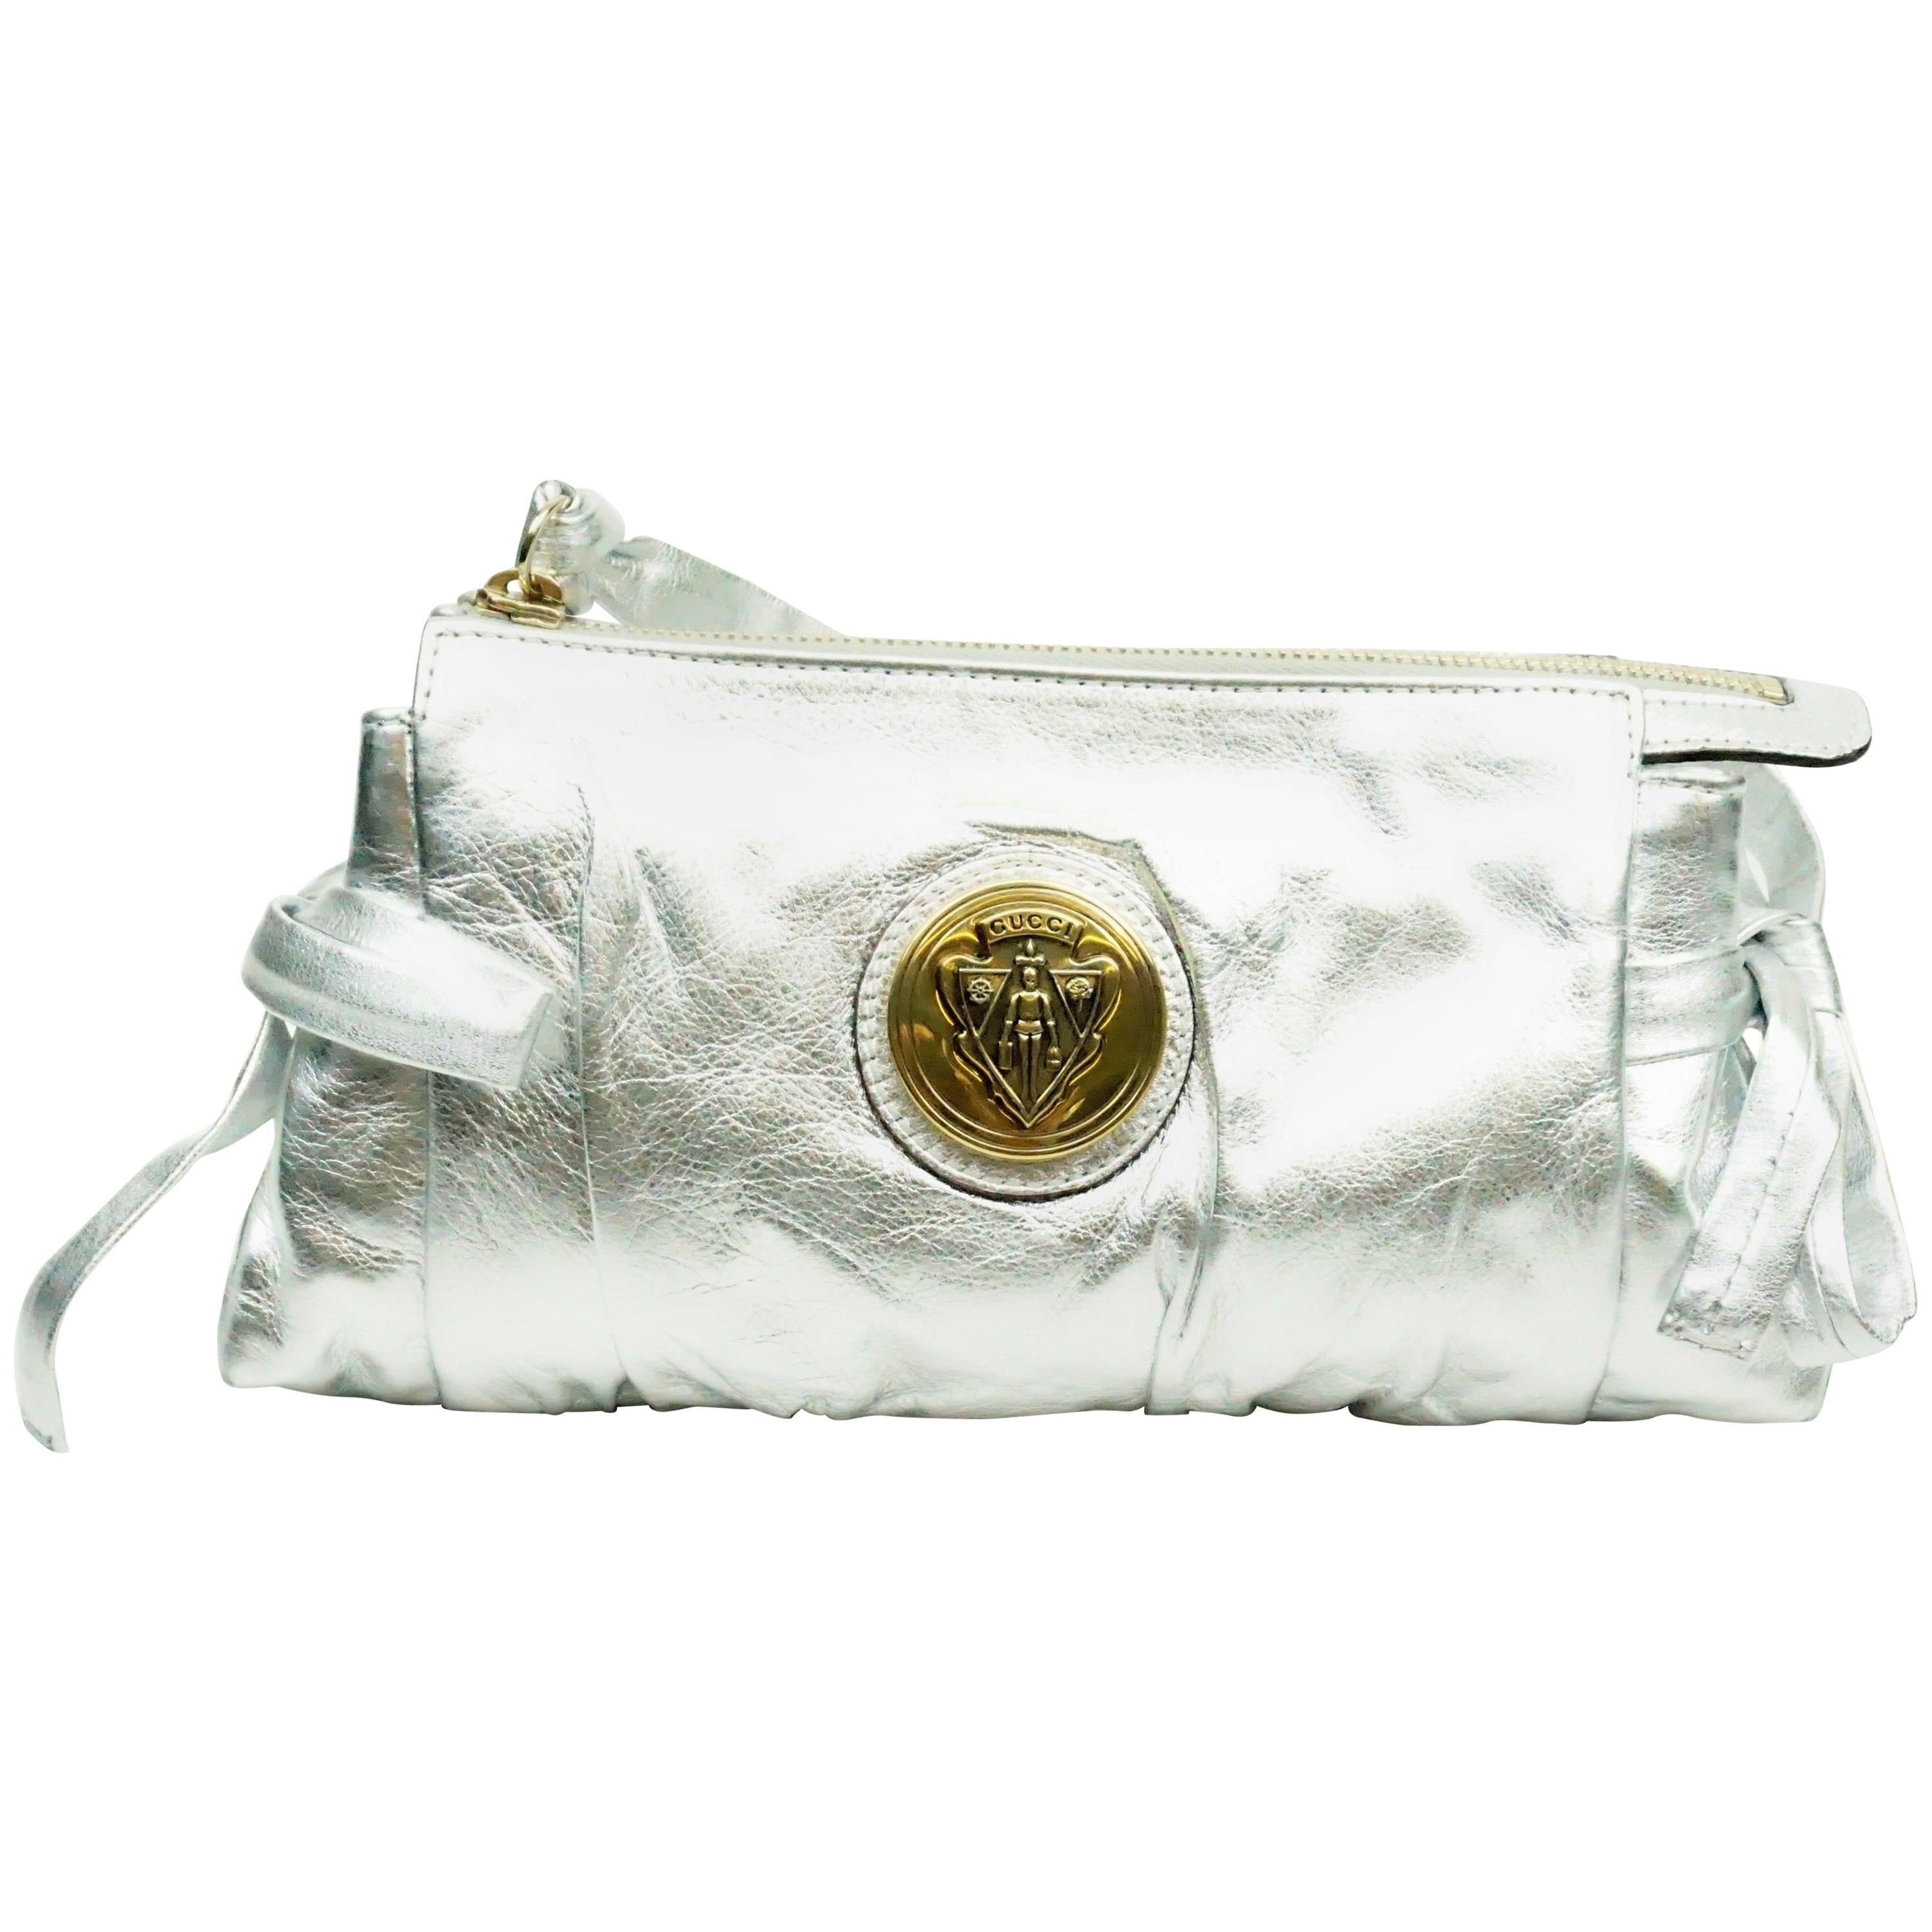 Gucci Silver Metallic Leather Clutch with Gold Emblem